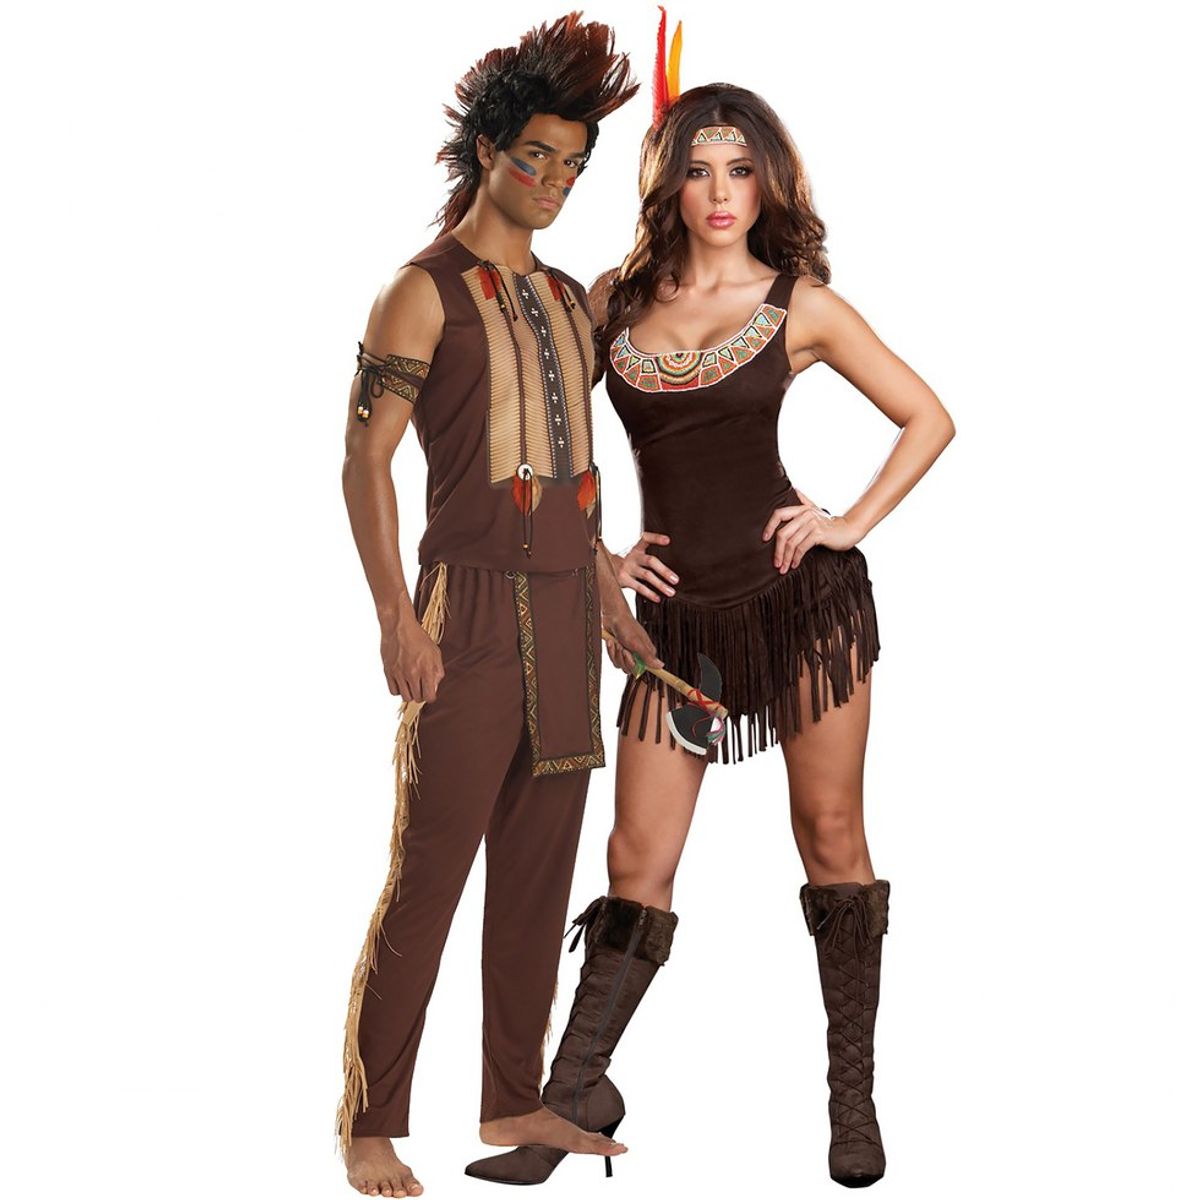 When Is A Halloween Costume Considered Too Offensive?